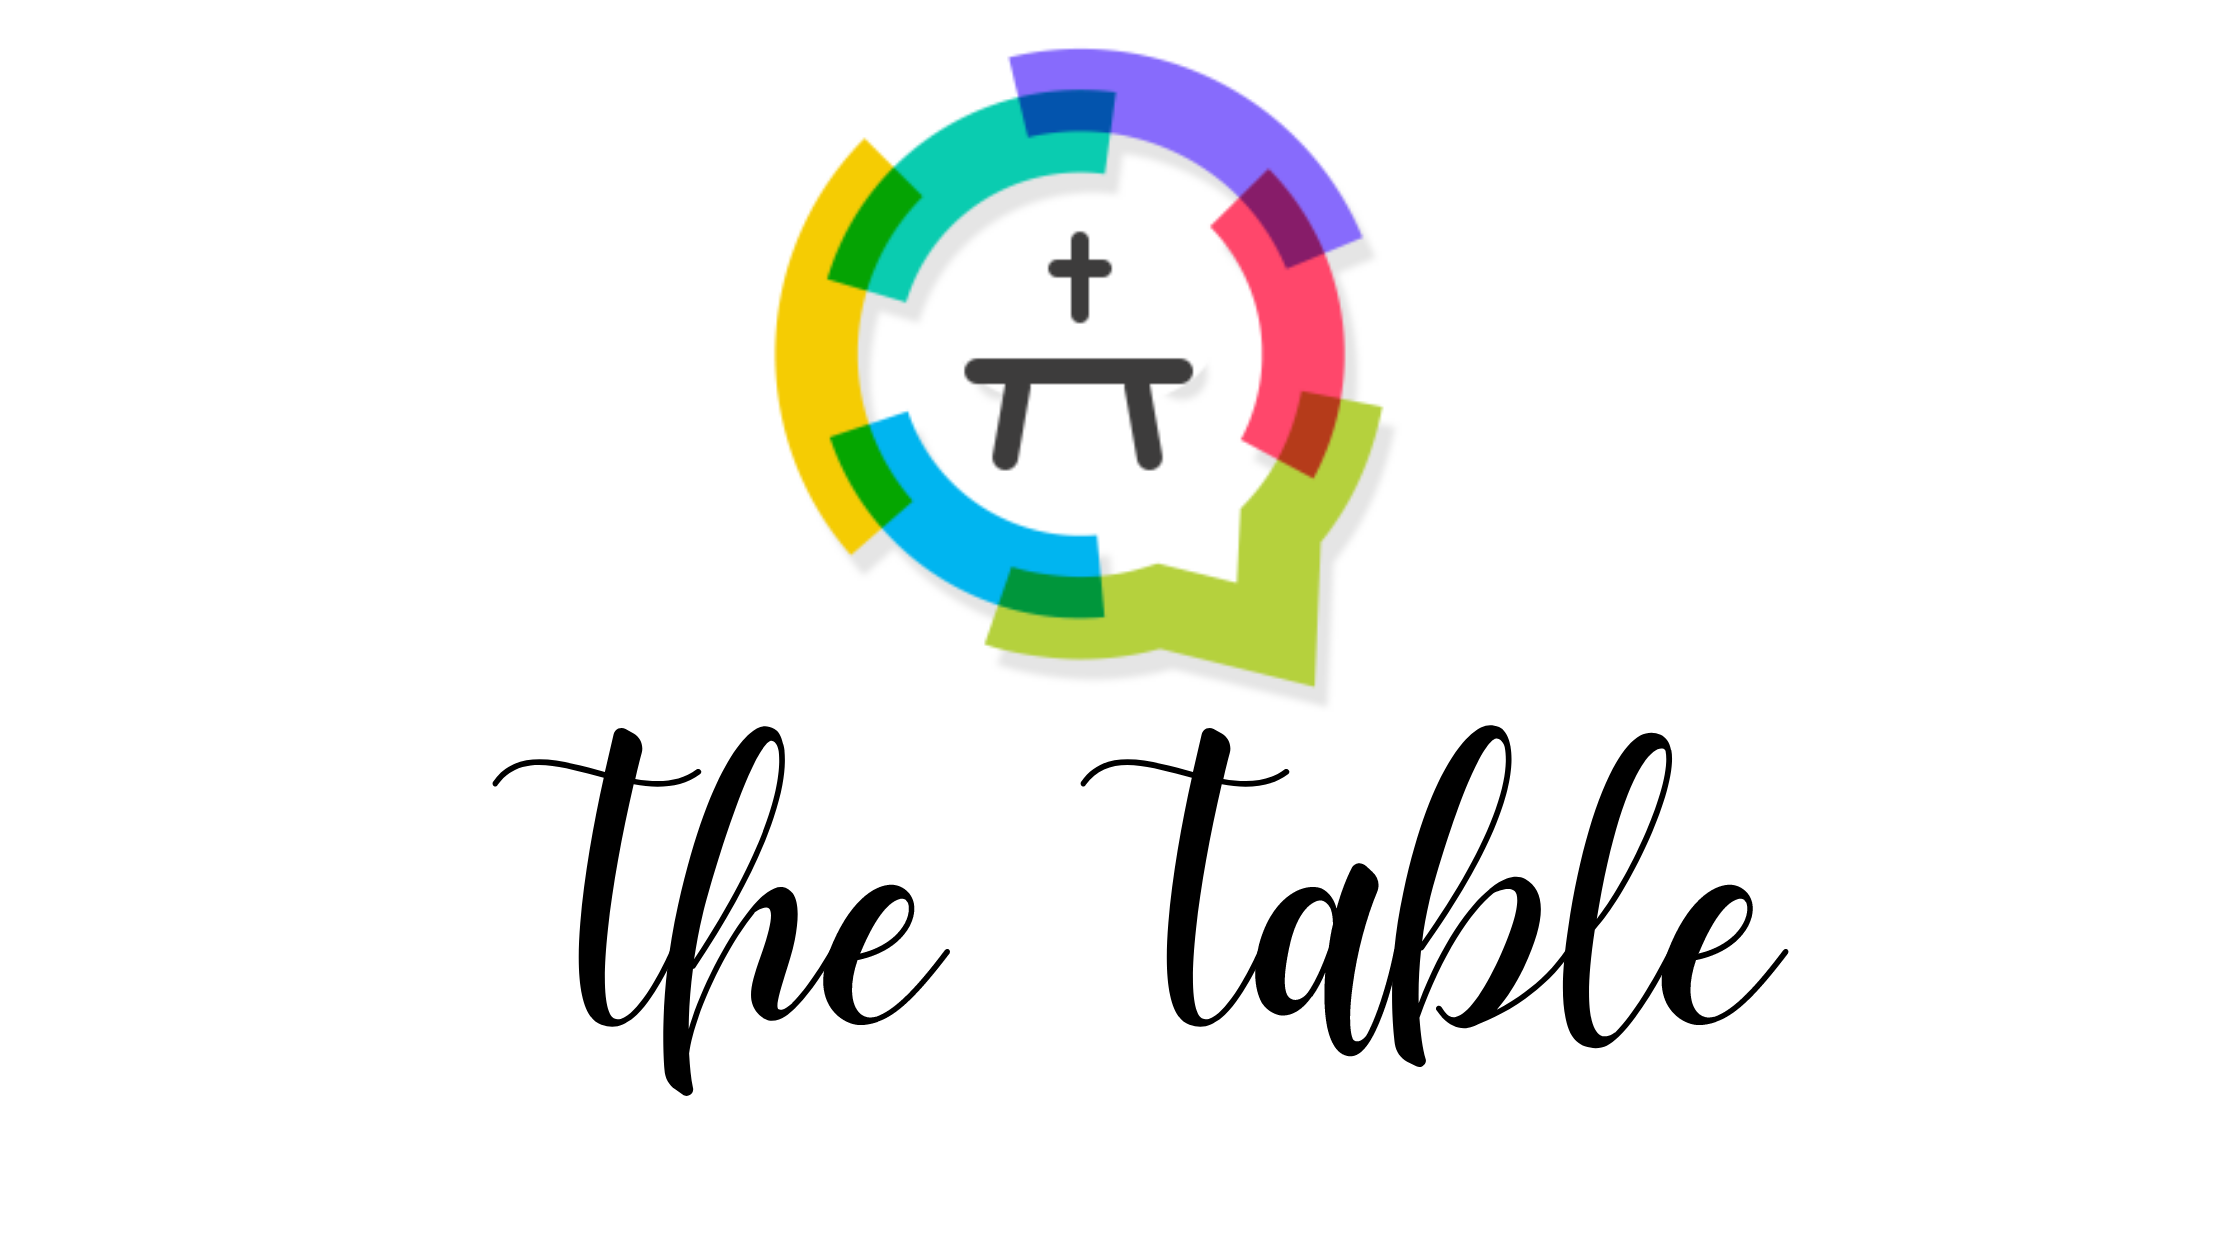 Introducing The Table